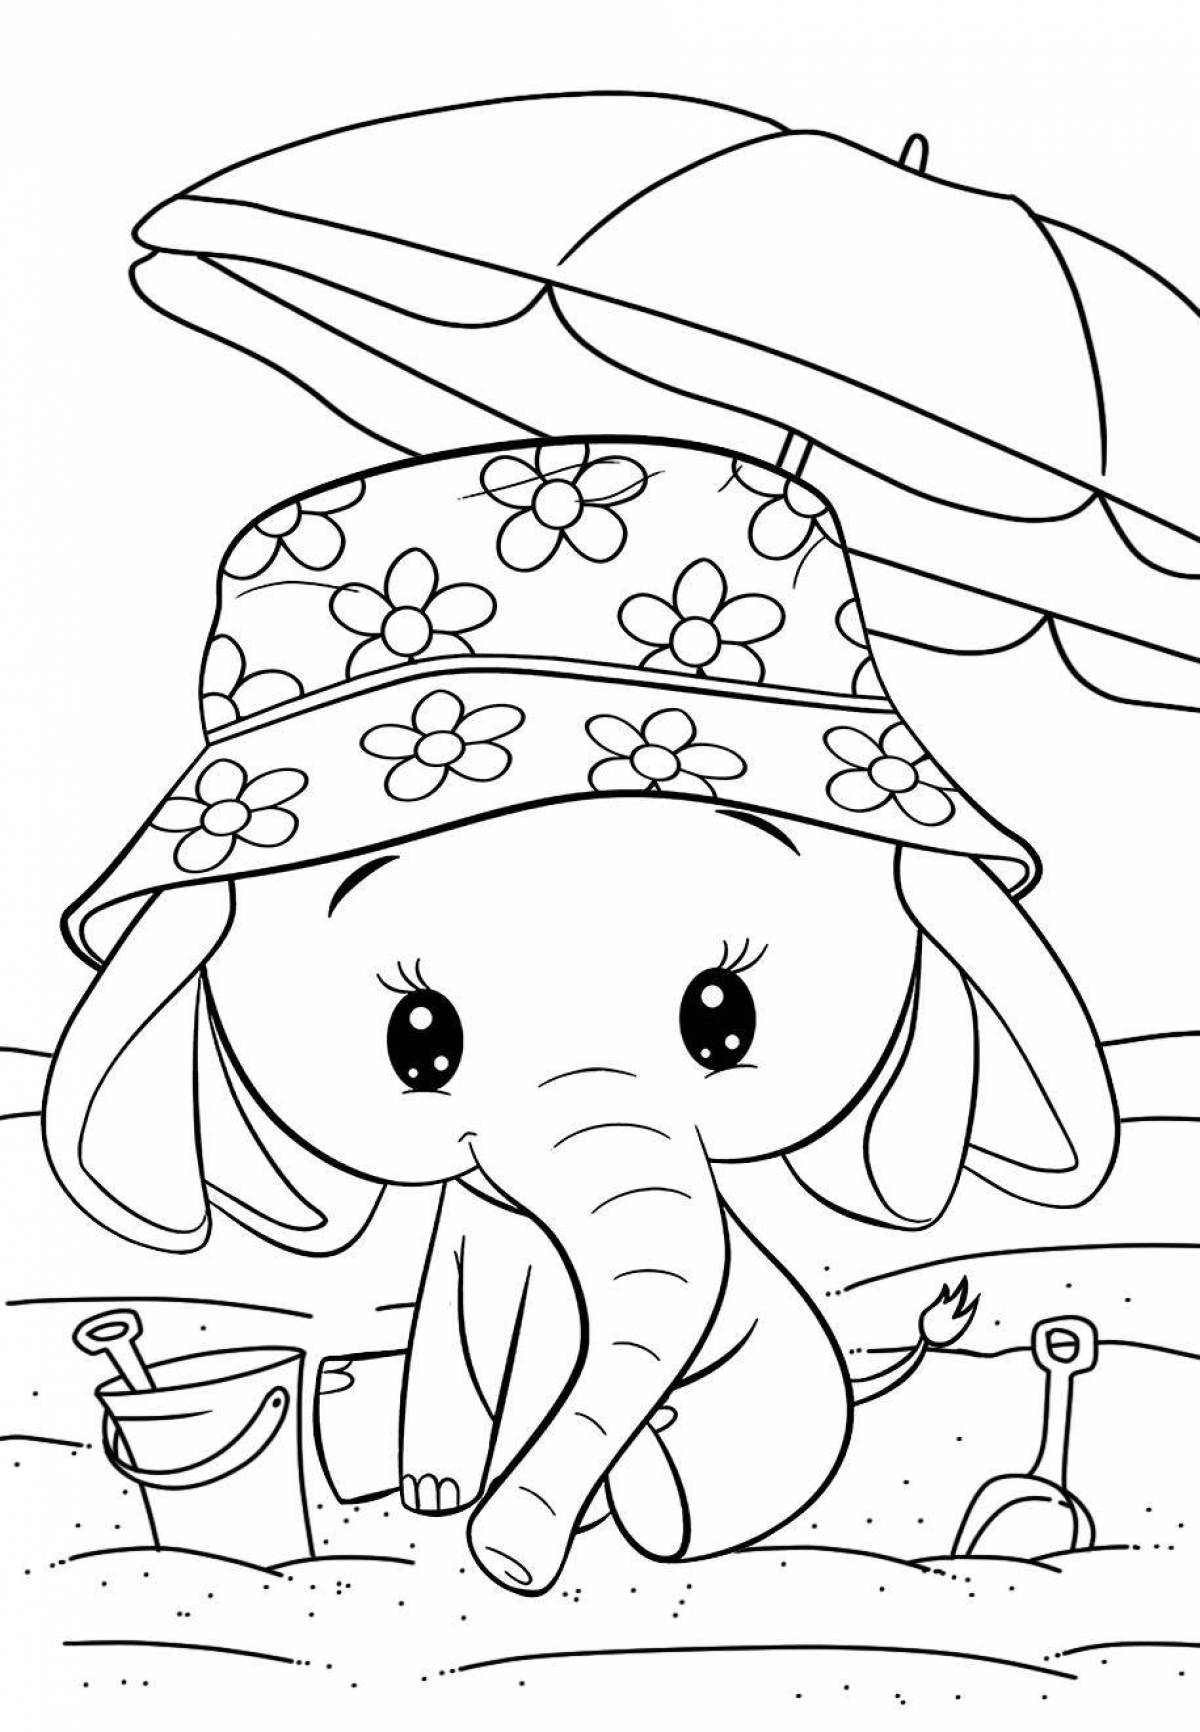 Radiant coloring page слон и девочка